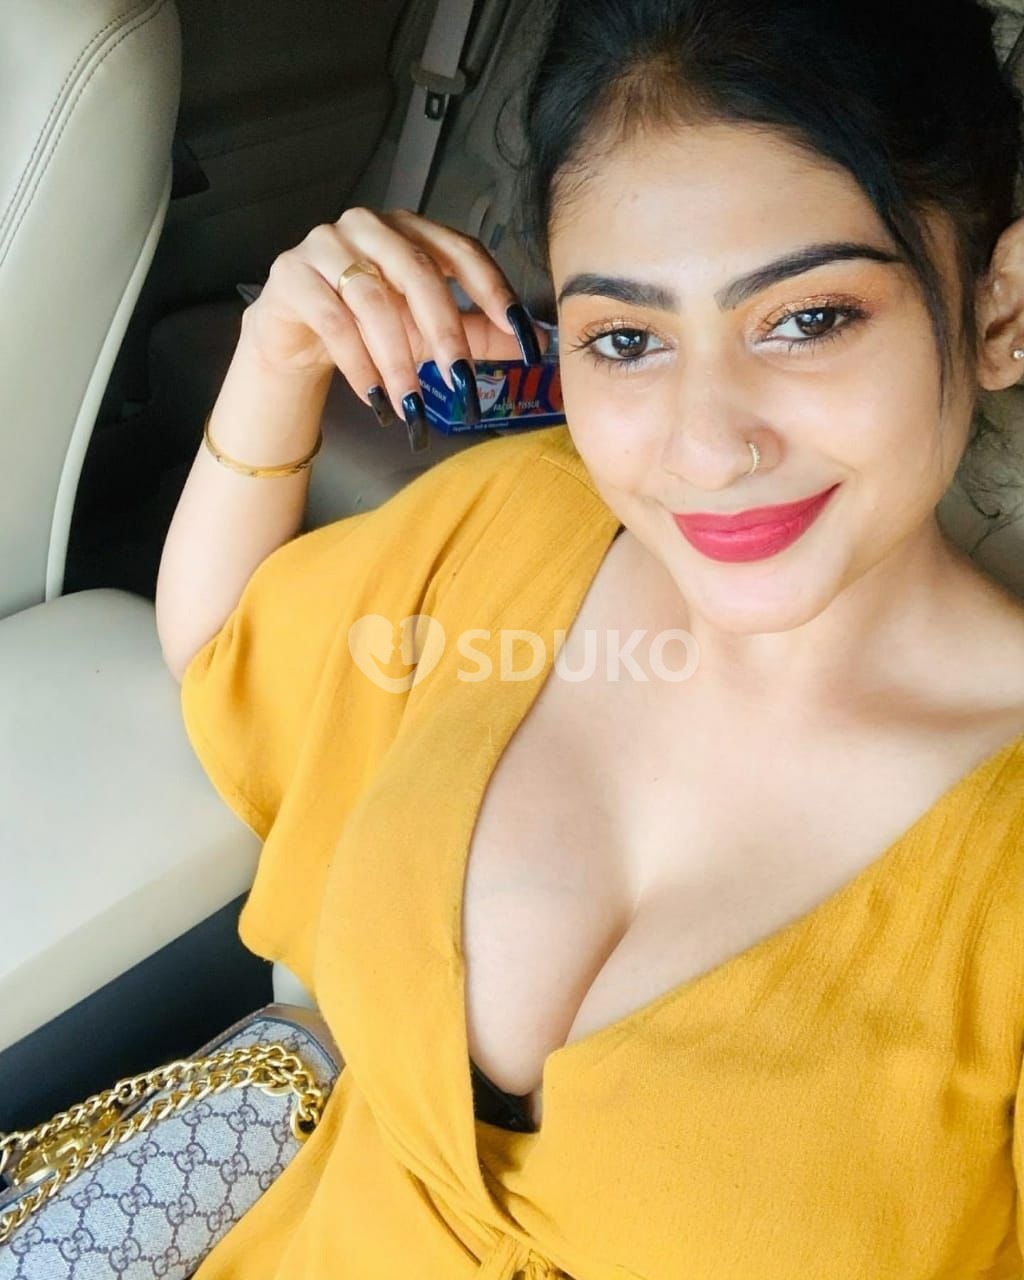 Manikonda 92564/71656 now available call girl service full safe and secure without condom sucking kissing all services a